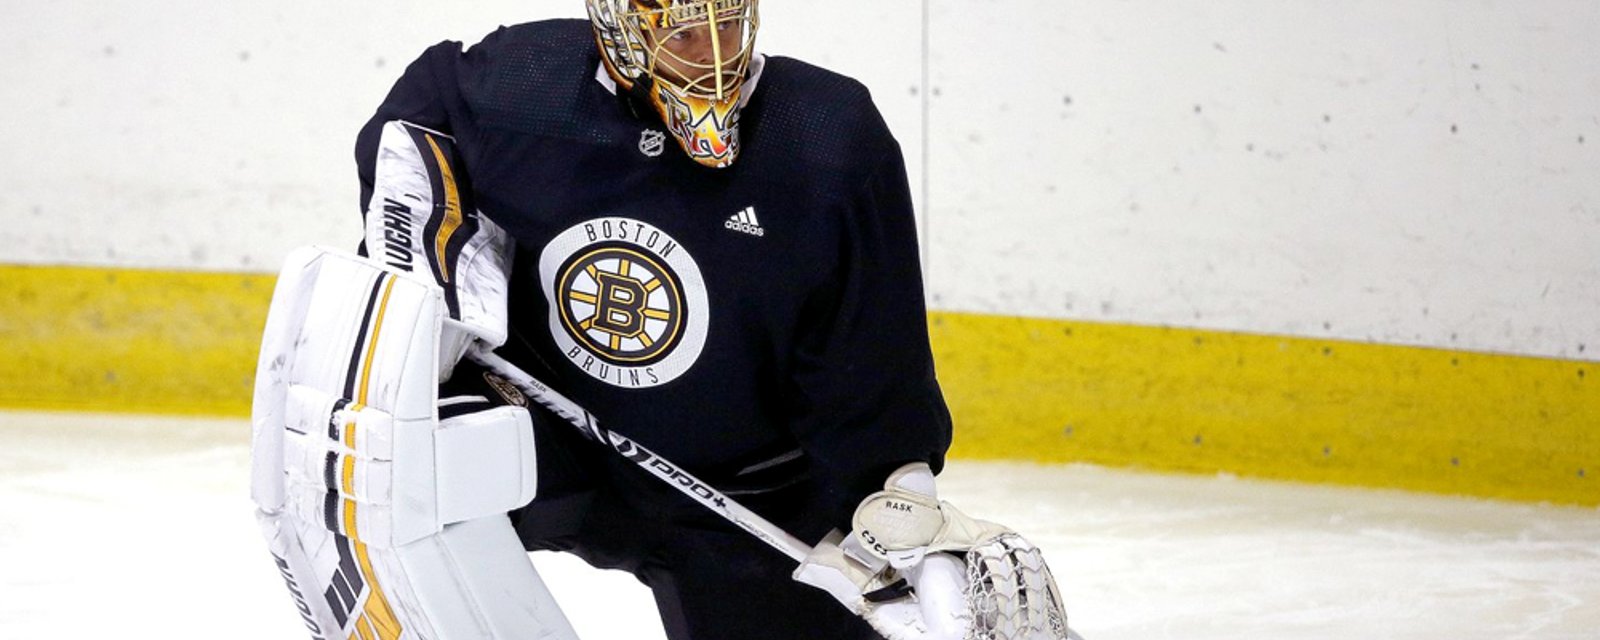 Tuukka Rask finally speaks after being in quarantine for two days